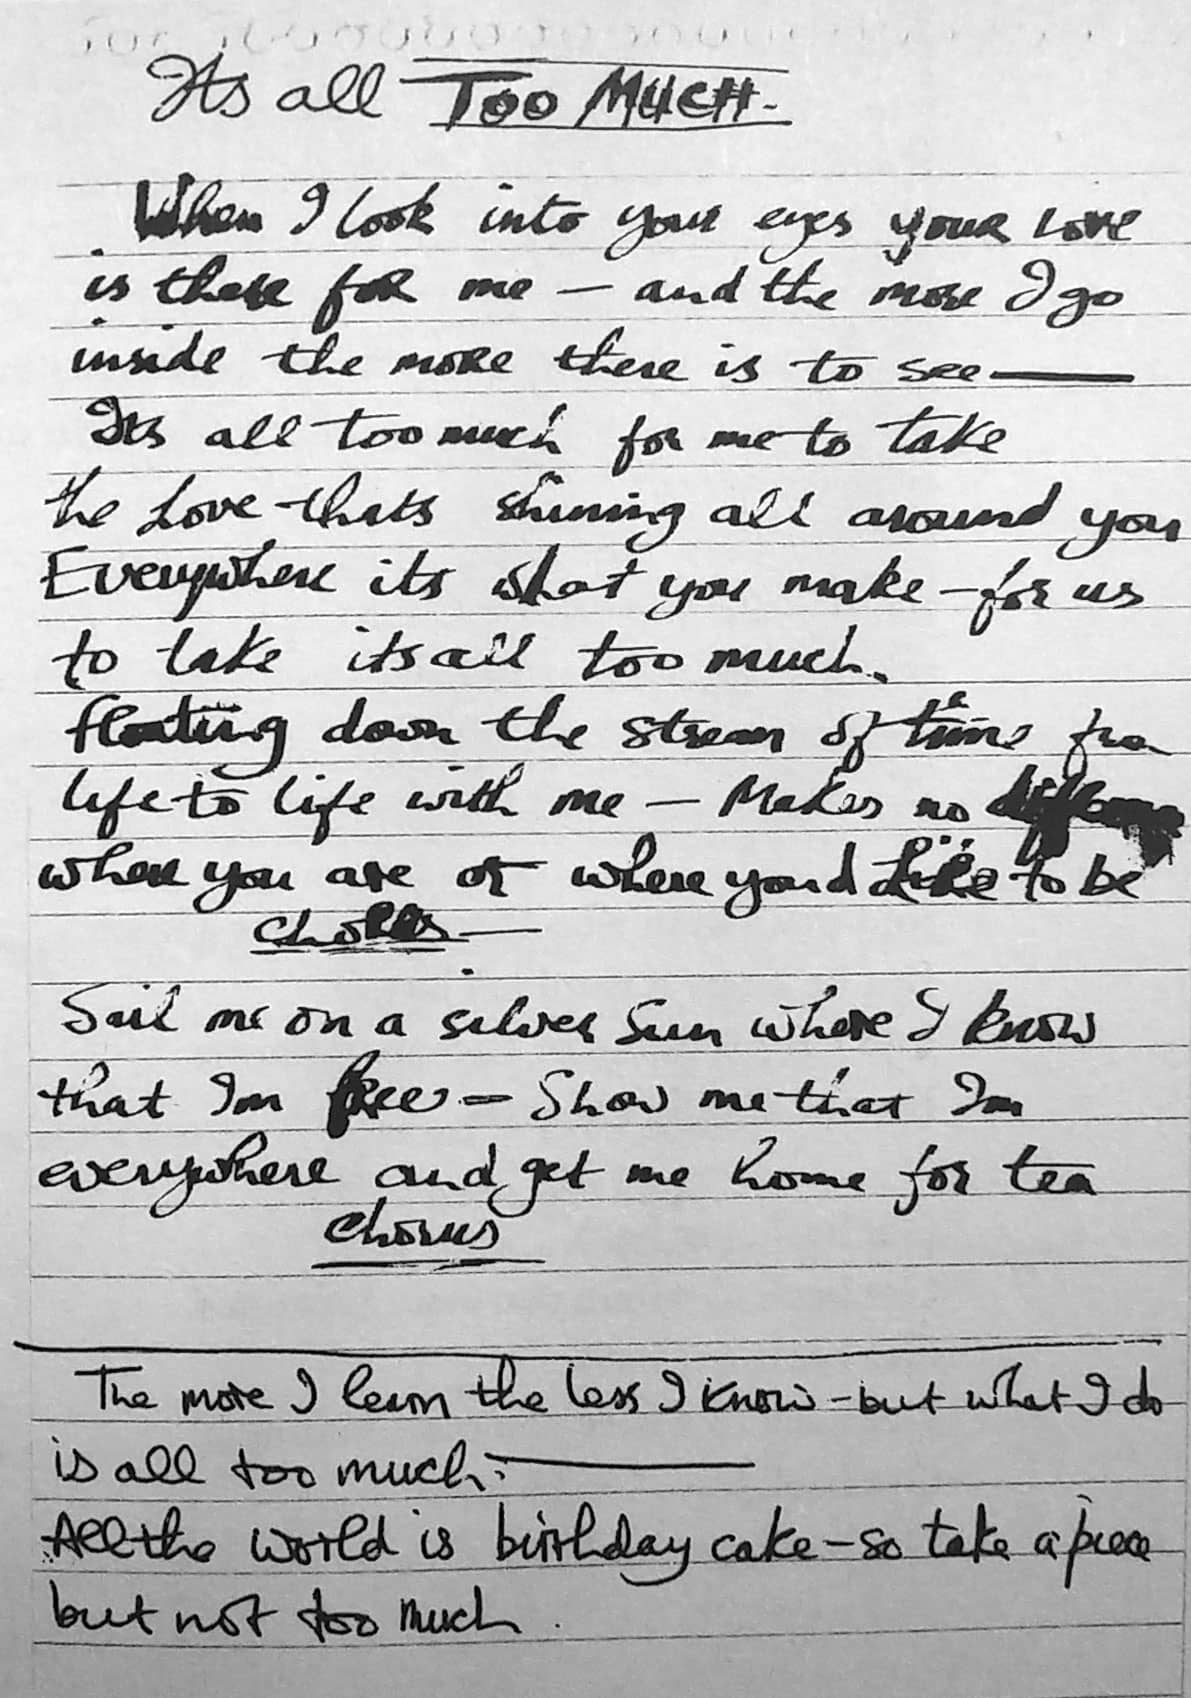 George Harrison’s lyrics for It's All Too Much, 1967